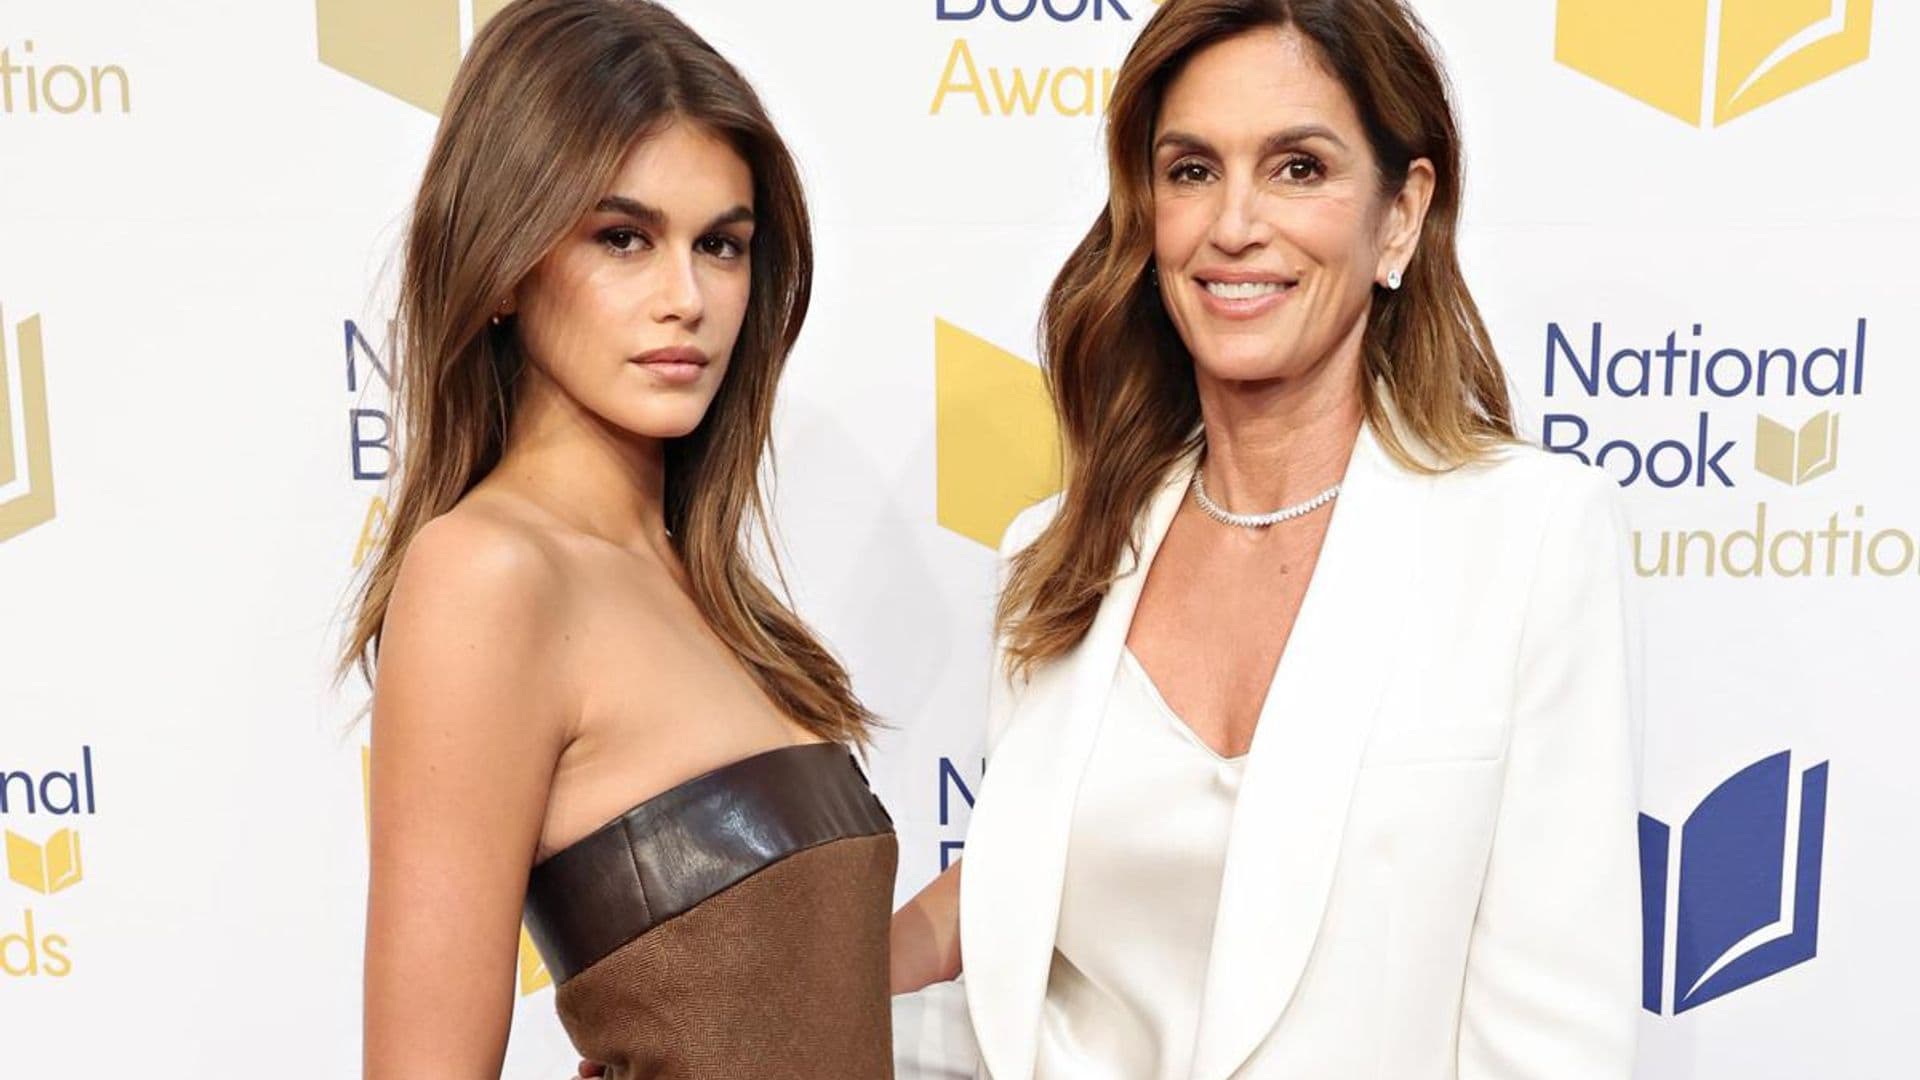 Kaia Gerber compliments Cindy Crawford in a throwback birthday photo